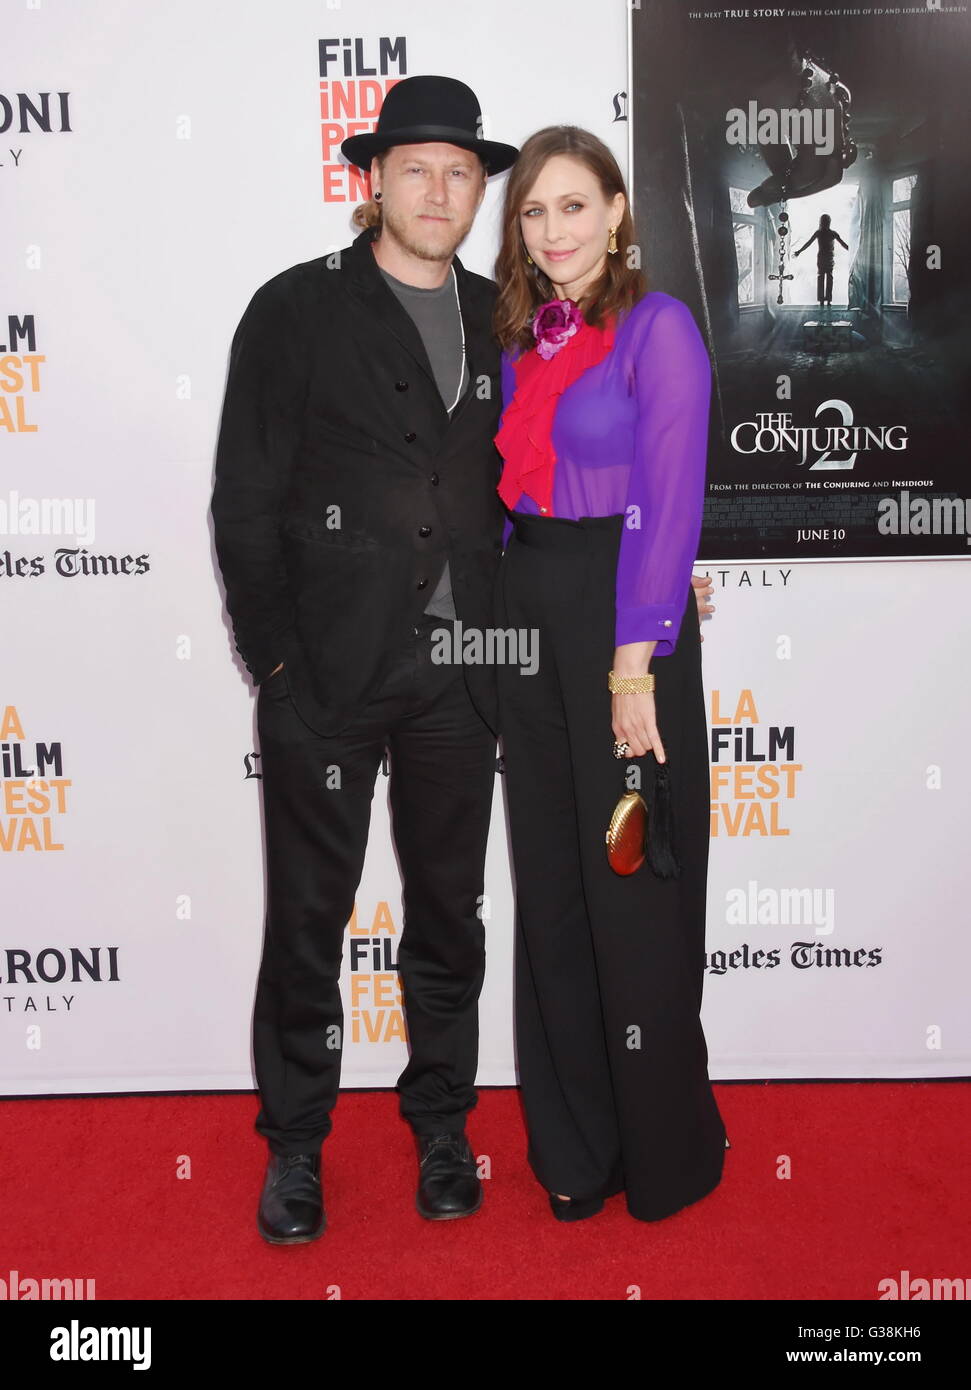 Hollywood, California. 7th June, 2016. HOLLYWOOD, CA - JUNE 07: Actress Vera Farmiga (R) and musician Renn Hawkey attend the premiere of 'The Conjuring 2' during the 2016 Los Angeles Film Festival at TCL Chinese Theatre IMAX on June 7, 2016 in Hollywood, California. | Verwendung weltweit © dpa/Alamy Live News Stock Photo